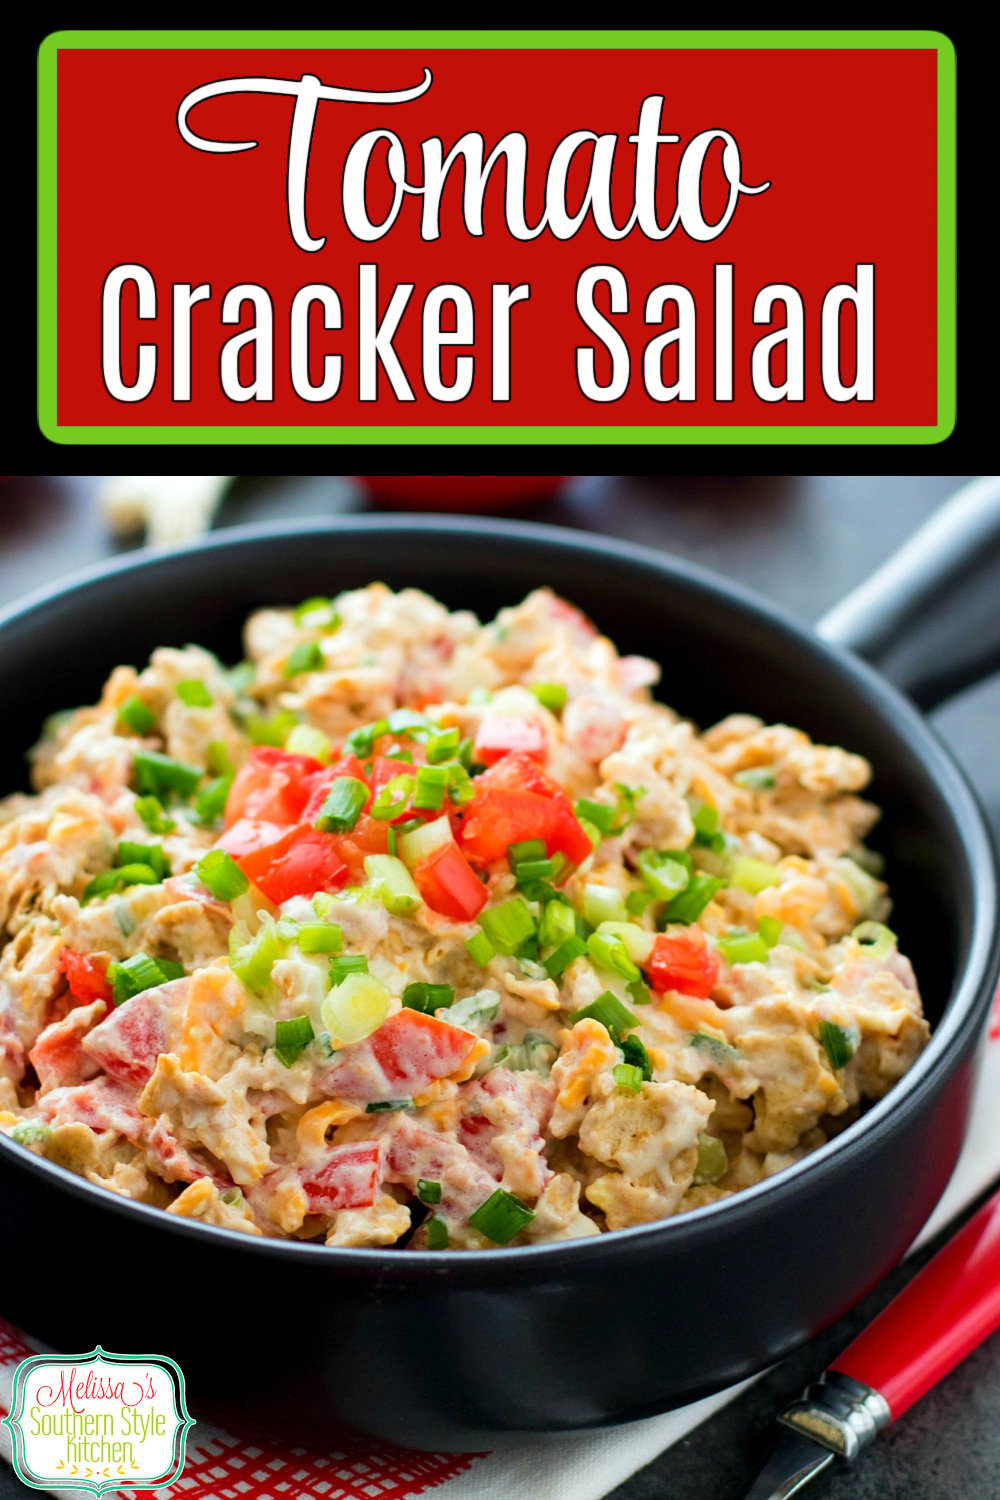 This scrumptious salad features plum tomatoes, green onion and hard boiled egg with a sprinkling of cheddar cheese. Tossed with a seasoned mayonnaise dressing and Saltine crackers it's certain to be the talk of your salads menu. #tomatocrackersalad #crackersalad #tomatosalad #summersides #saladrecipes ##plumtomatoes #tomatorecipes #southernfood #vegetarian #southernrecipes via @melissasssk